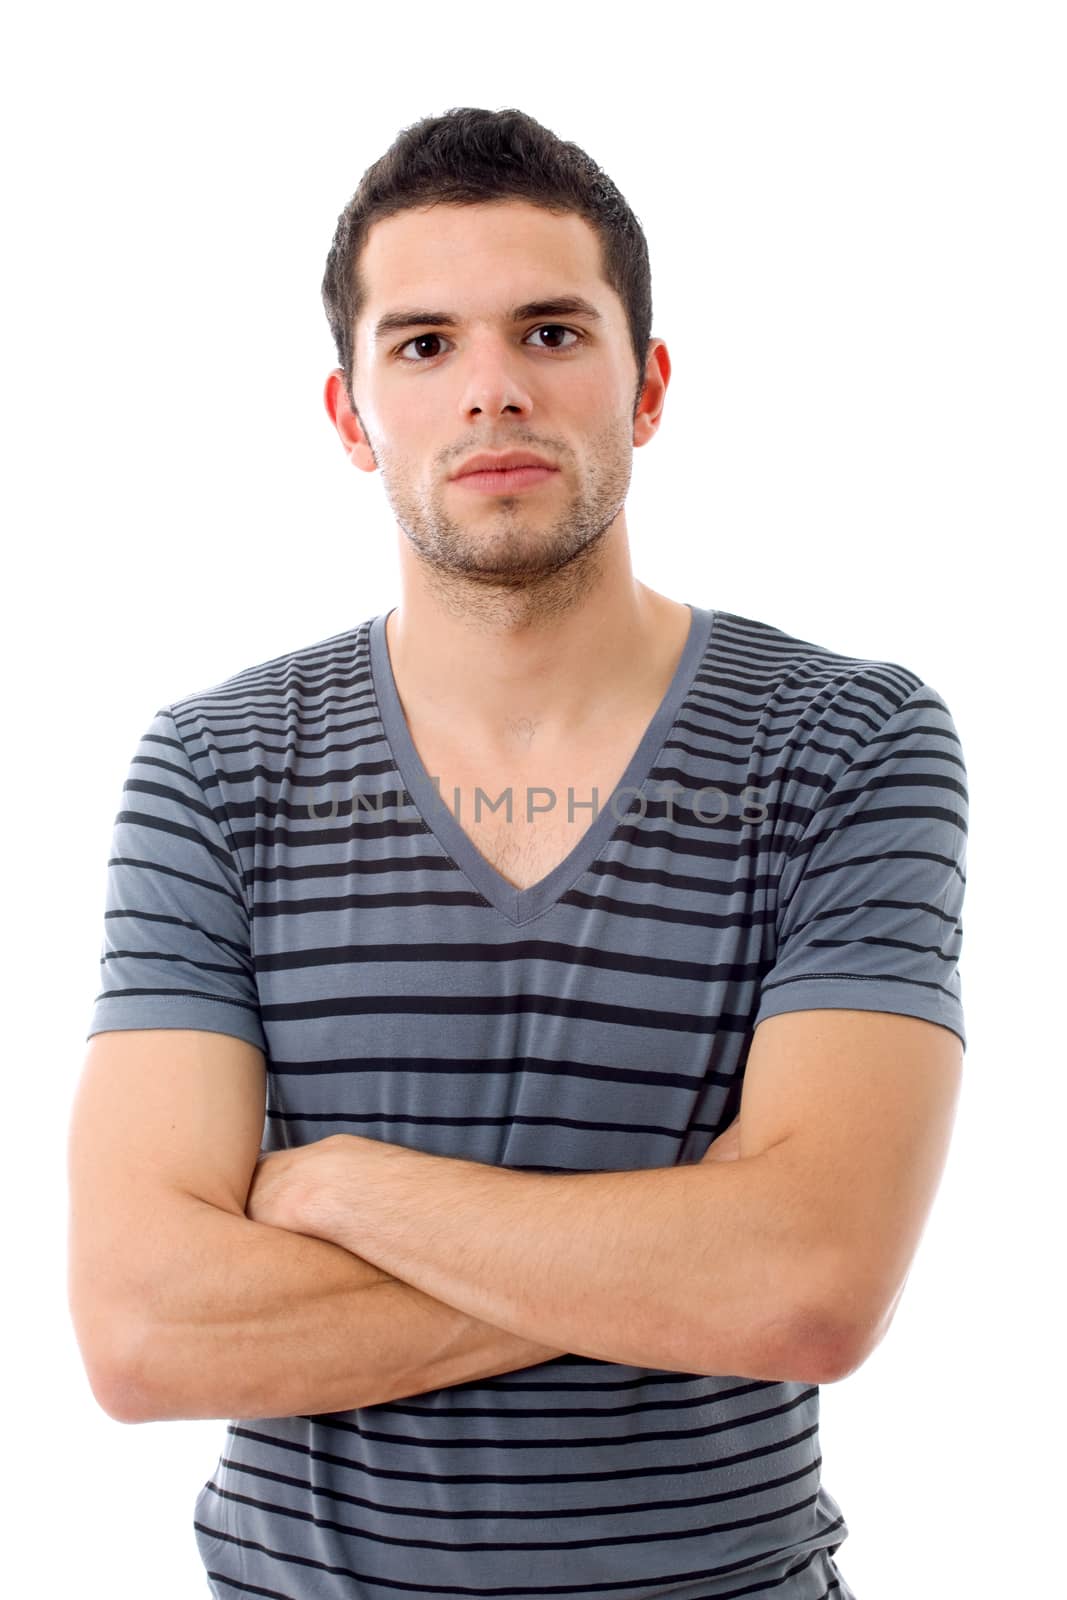 young casual man portrait, isolated on white